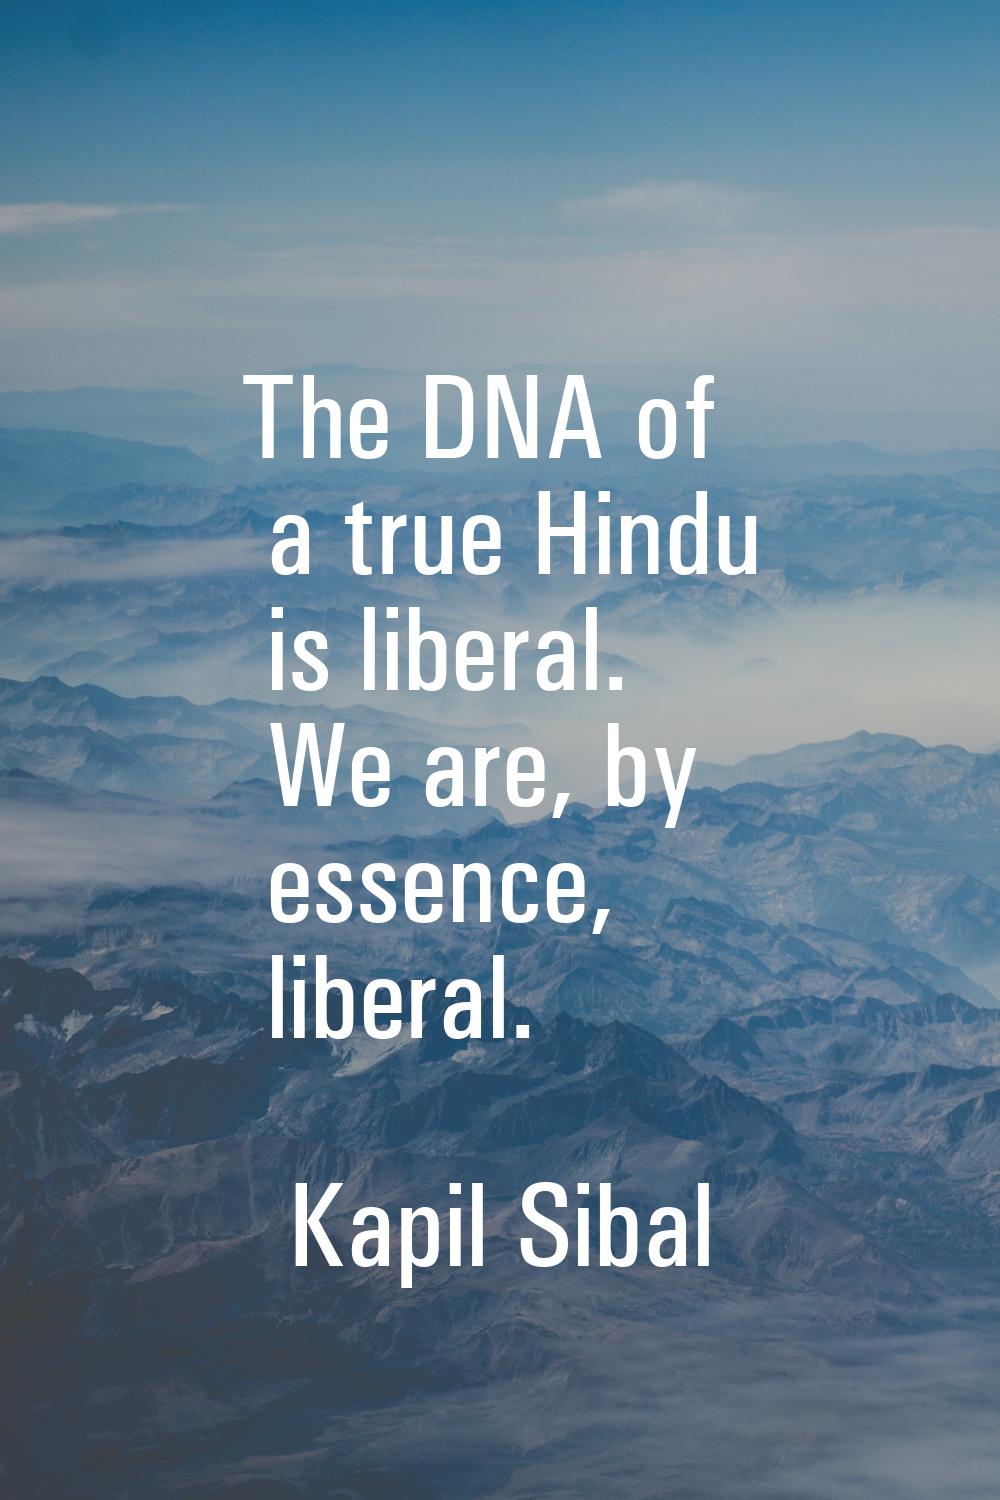 The DNA of a true Hindu is liberal. We are, by essence, liberal.